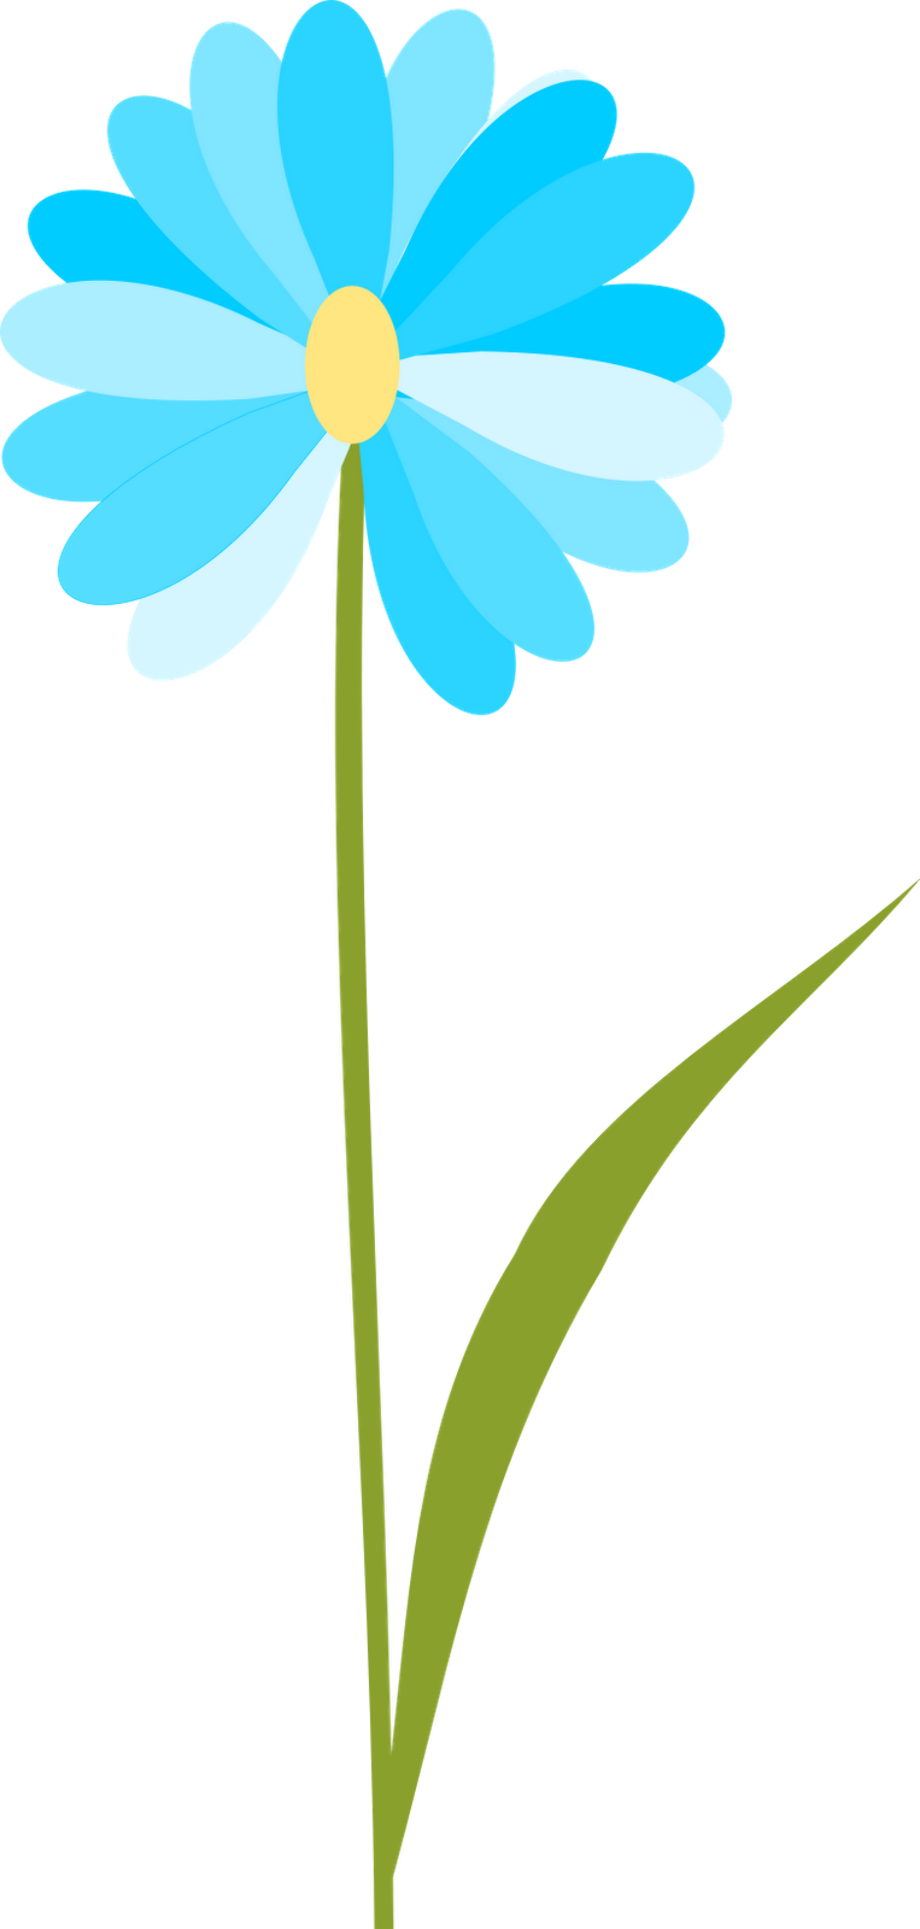 daisy clipart turquoise